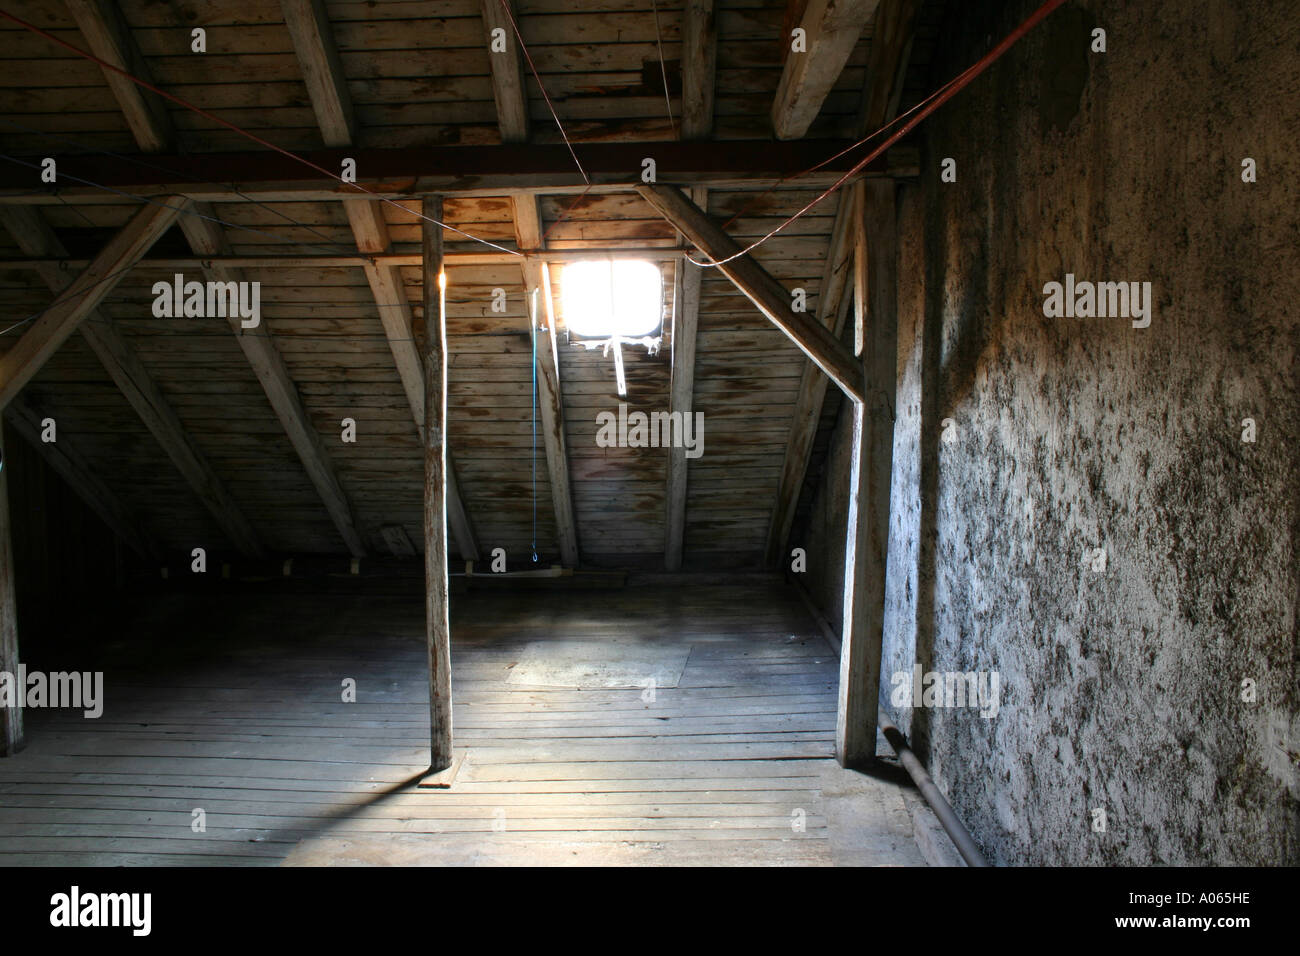 Sunlight entering into a roofed sheltered area through skylight Stock Photo